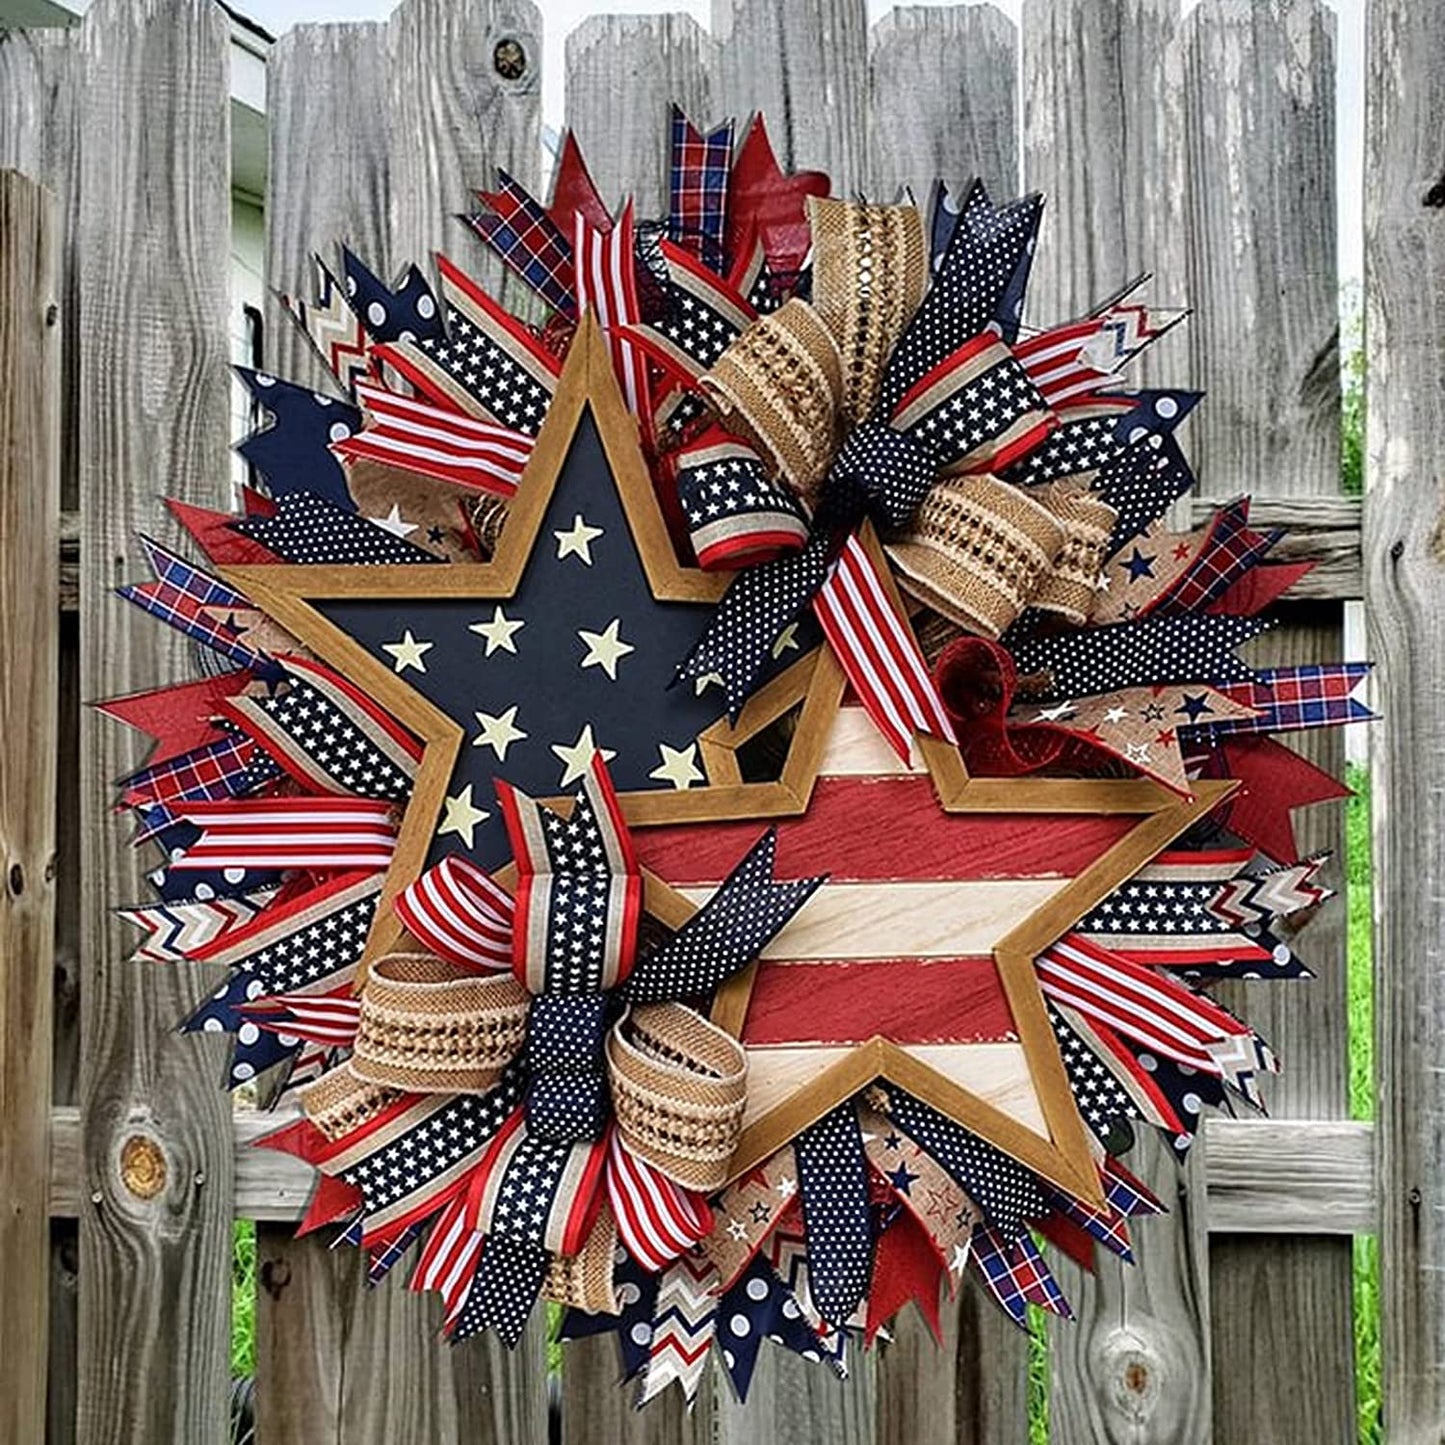 2023New Summer Patriotic Independence Day Wreath, Memorial Day Wreaths for Front Door, Festival Celebration Farmhouse Wreaths, All Season Welcome Sign Door Hangers (Wreath-A)